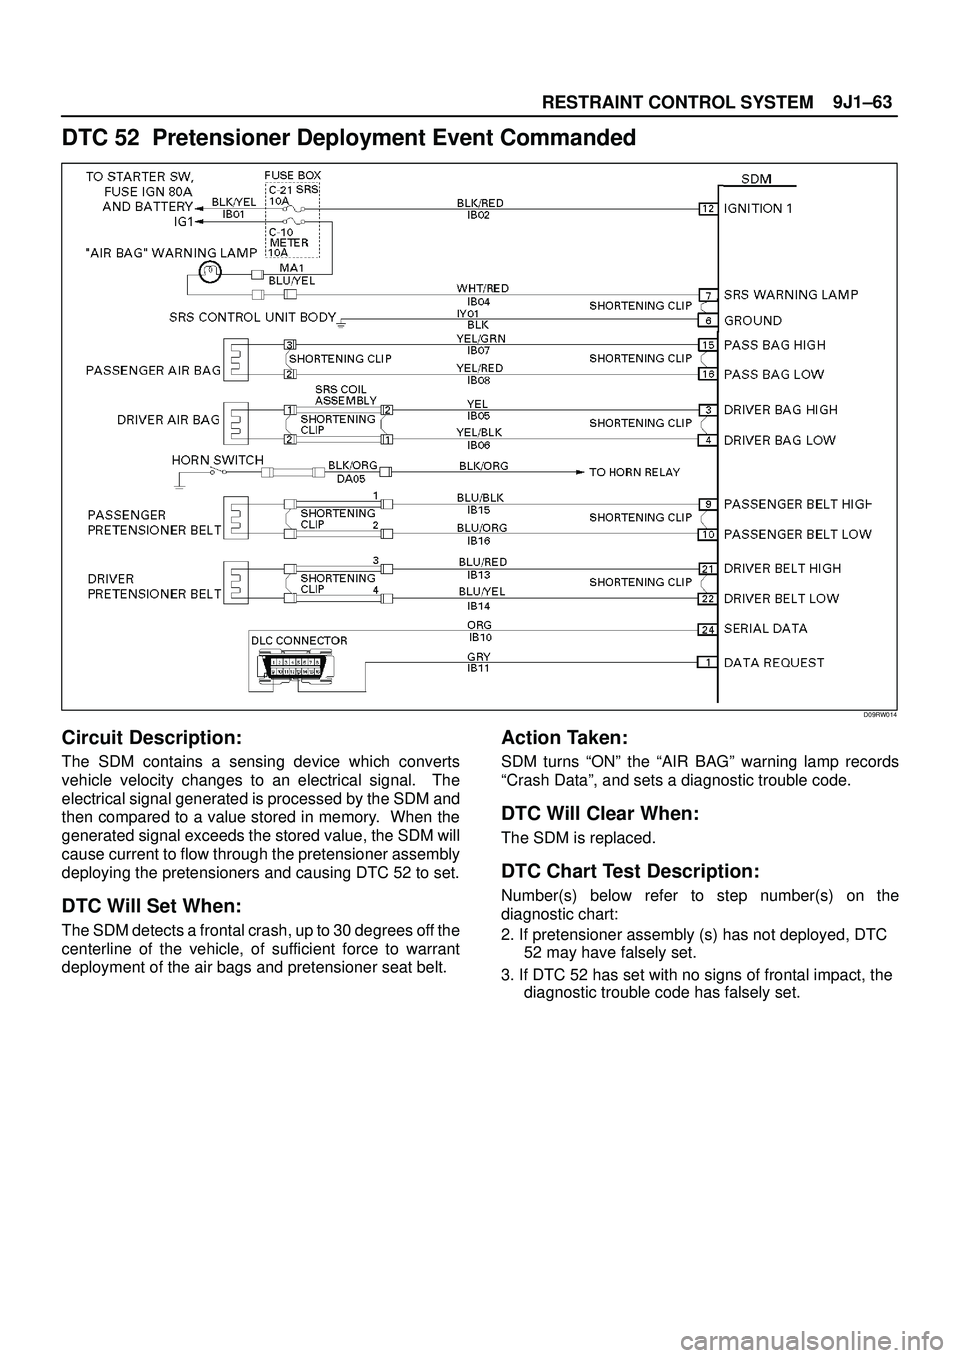 ISUZU TROOPER 1998  Service Repair Manual 9J1±63
RESTRAINT CONTROL SYSTEM
DTC 52  Pretensioner Deployment Event Commanded
D09RW014
Circuit Description:
The SDM contains a sensing device which converts
vehicle velocity changes to an electrica